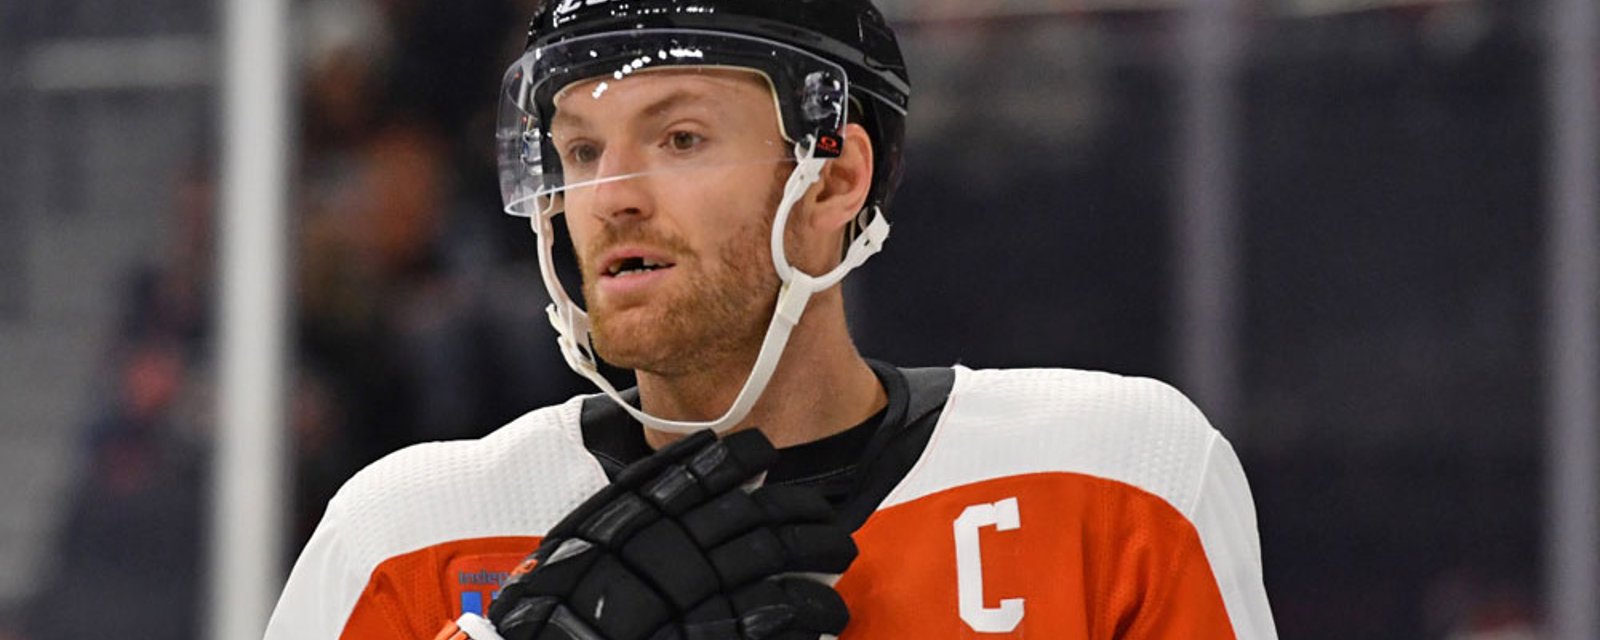 Reports that Sean Couturier's NHL career may be over